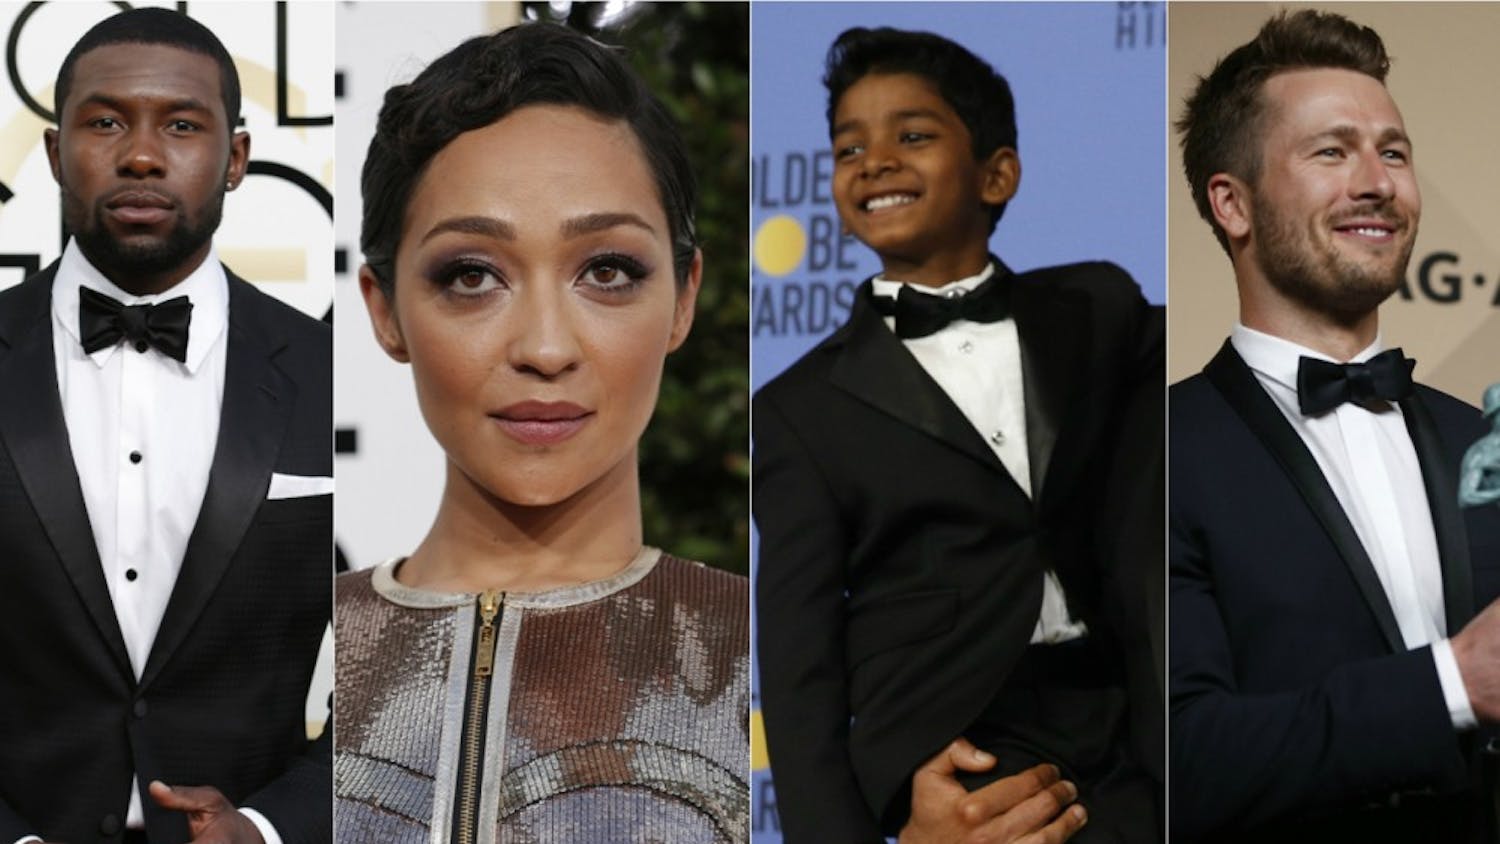 Trevante Rhodes, Ruth Negga, Sunny Pawar and Glen Powell are just a few of the breakout stars of this year's Oscars.